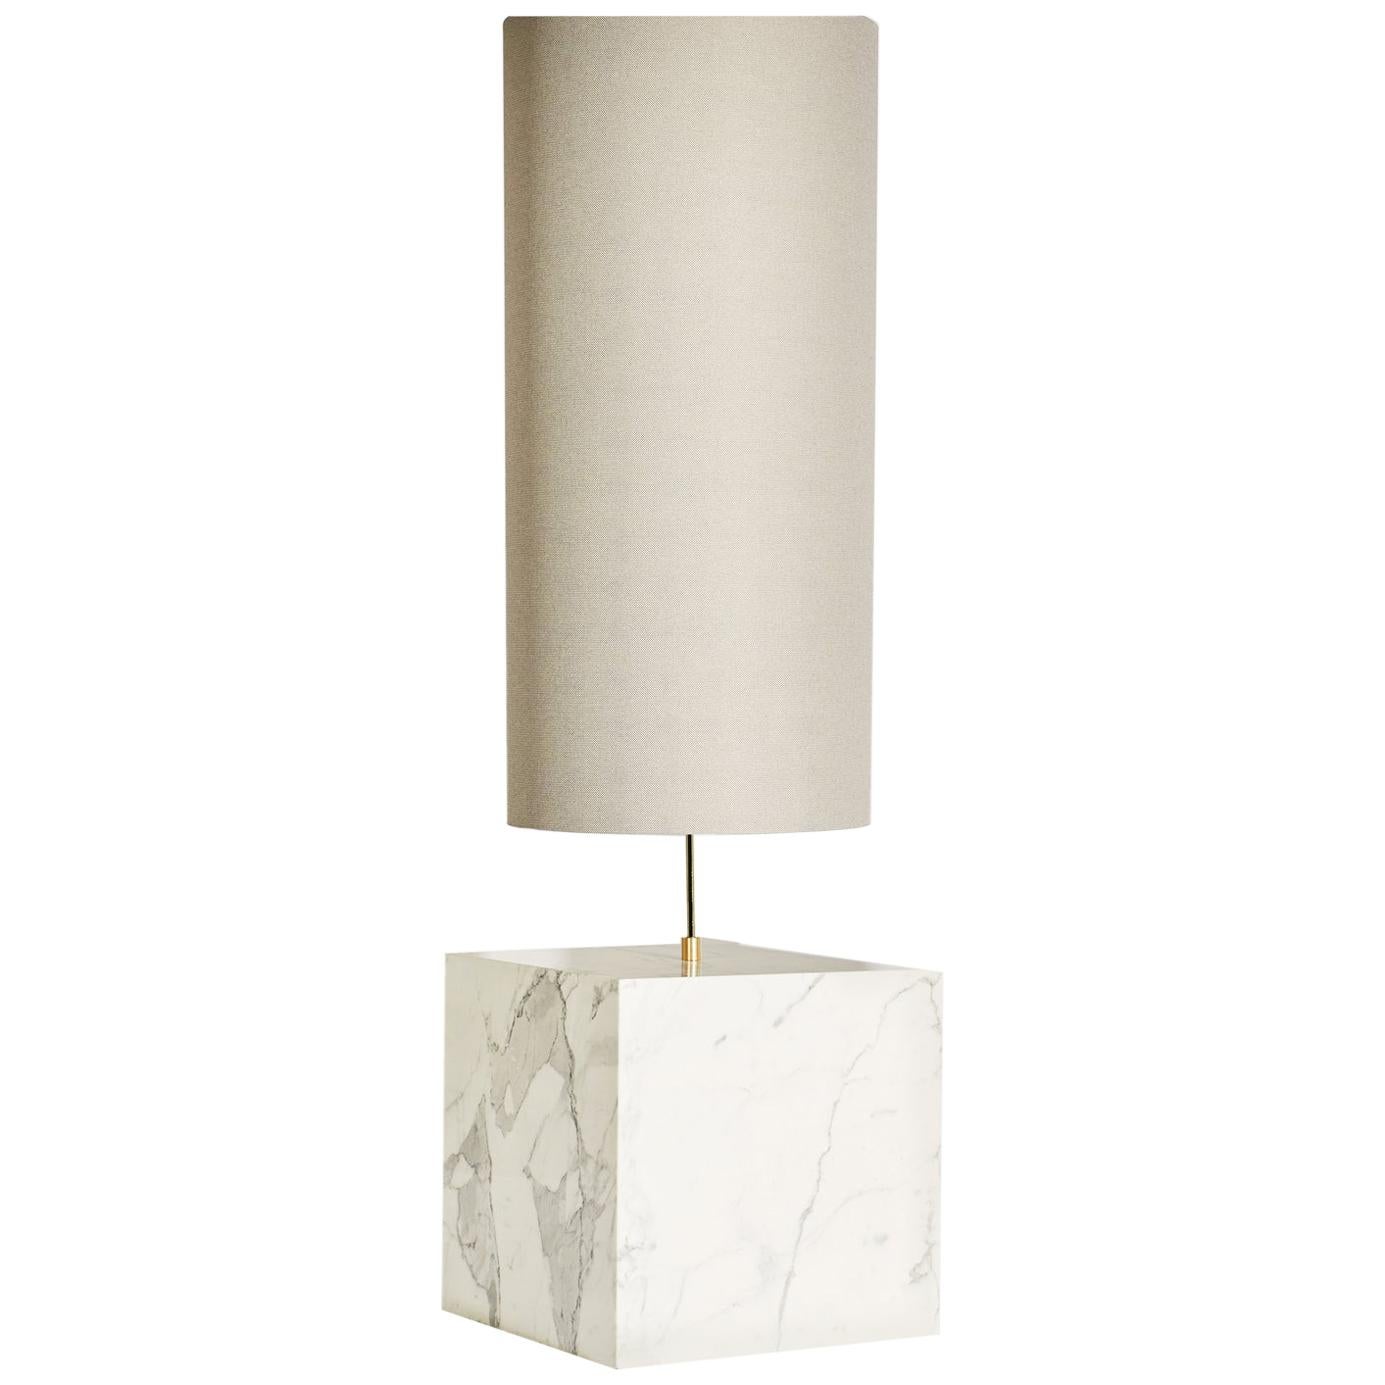 The Coexist Floor Lamp consists of a marble cube base and a lampshade made from recycled fabric.

The lamp serves as a sculptural centerpiece for any room, emitting a soft warm light to draw the viewer into the materials. The bold geometry of the